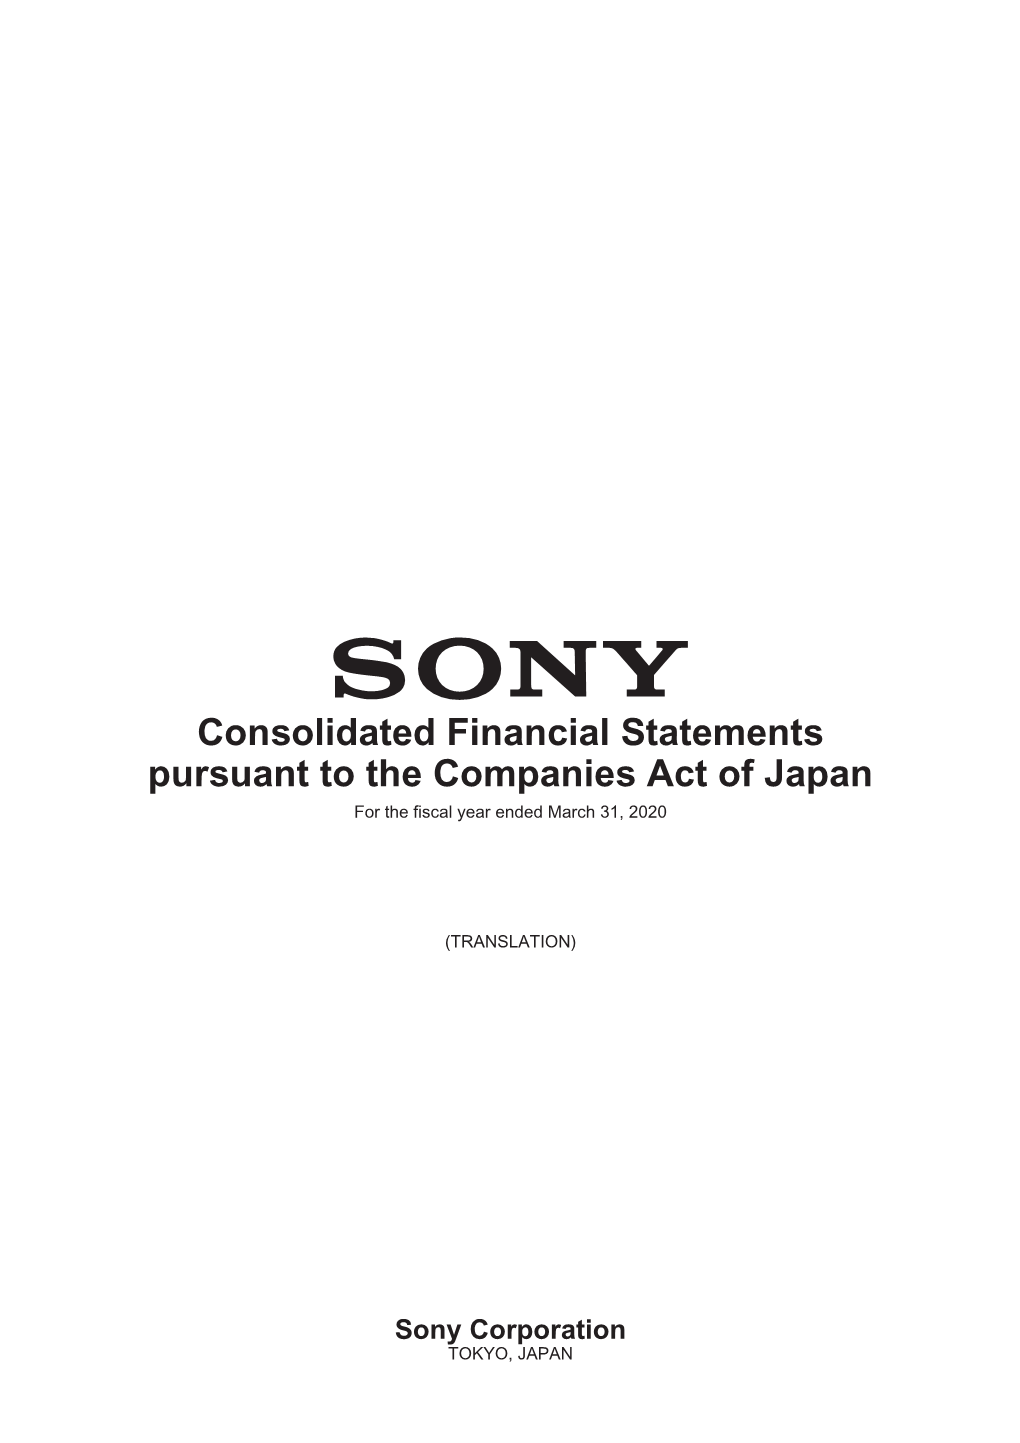 Consolidated Financial Statements Pursuant to the Companies Act of Japan for the Fiscal Year Ended March 31, 2020